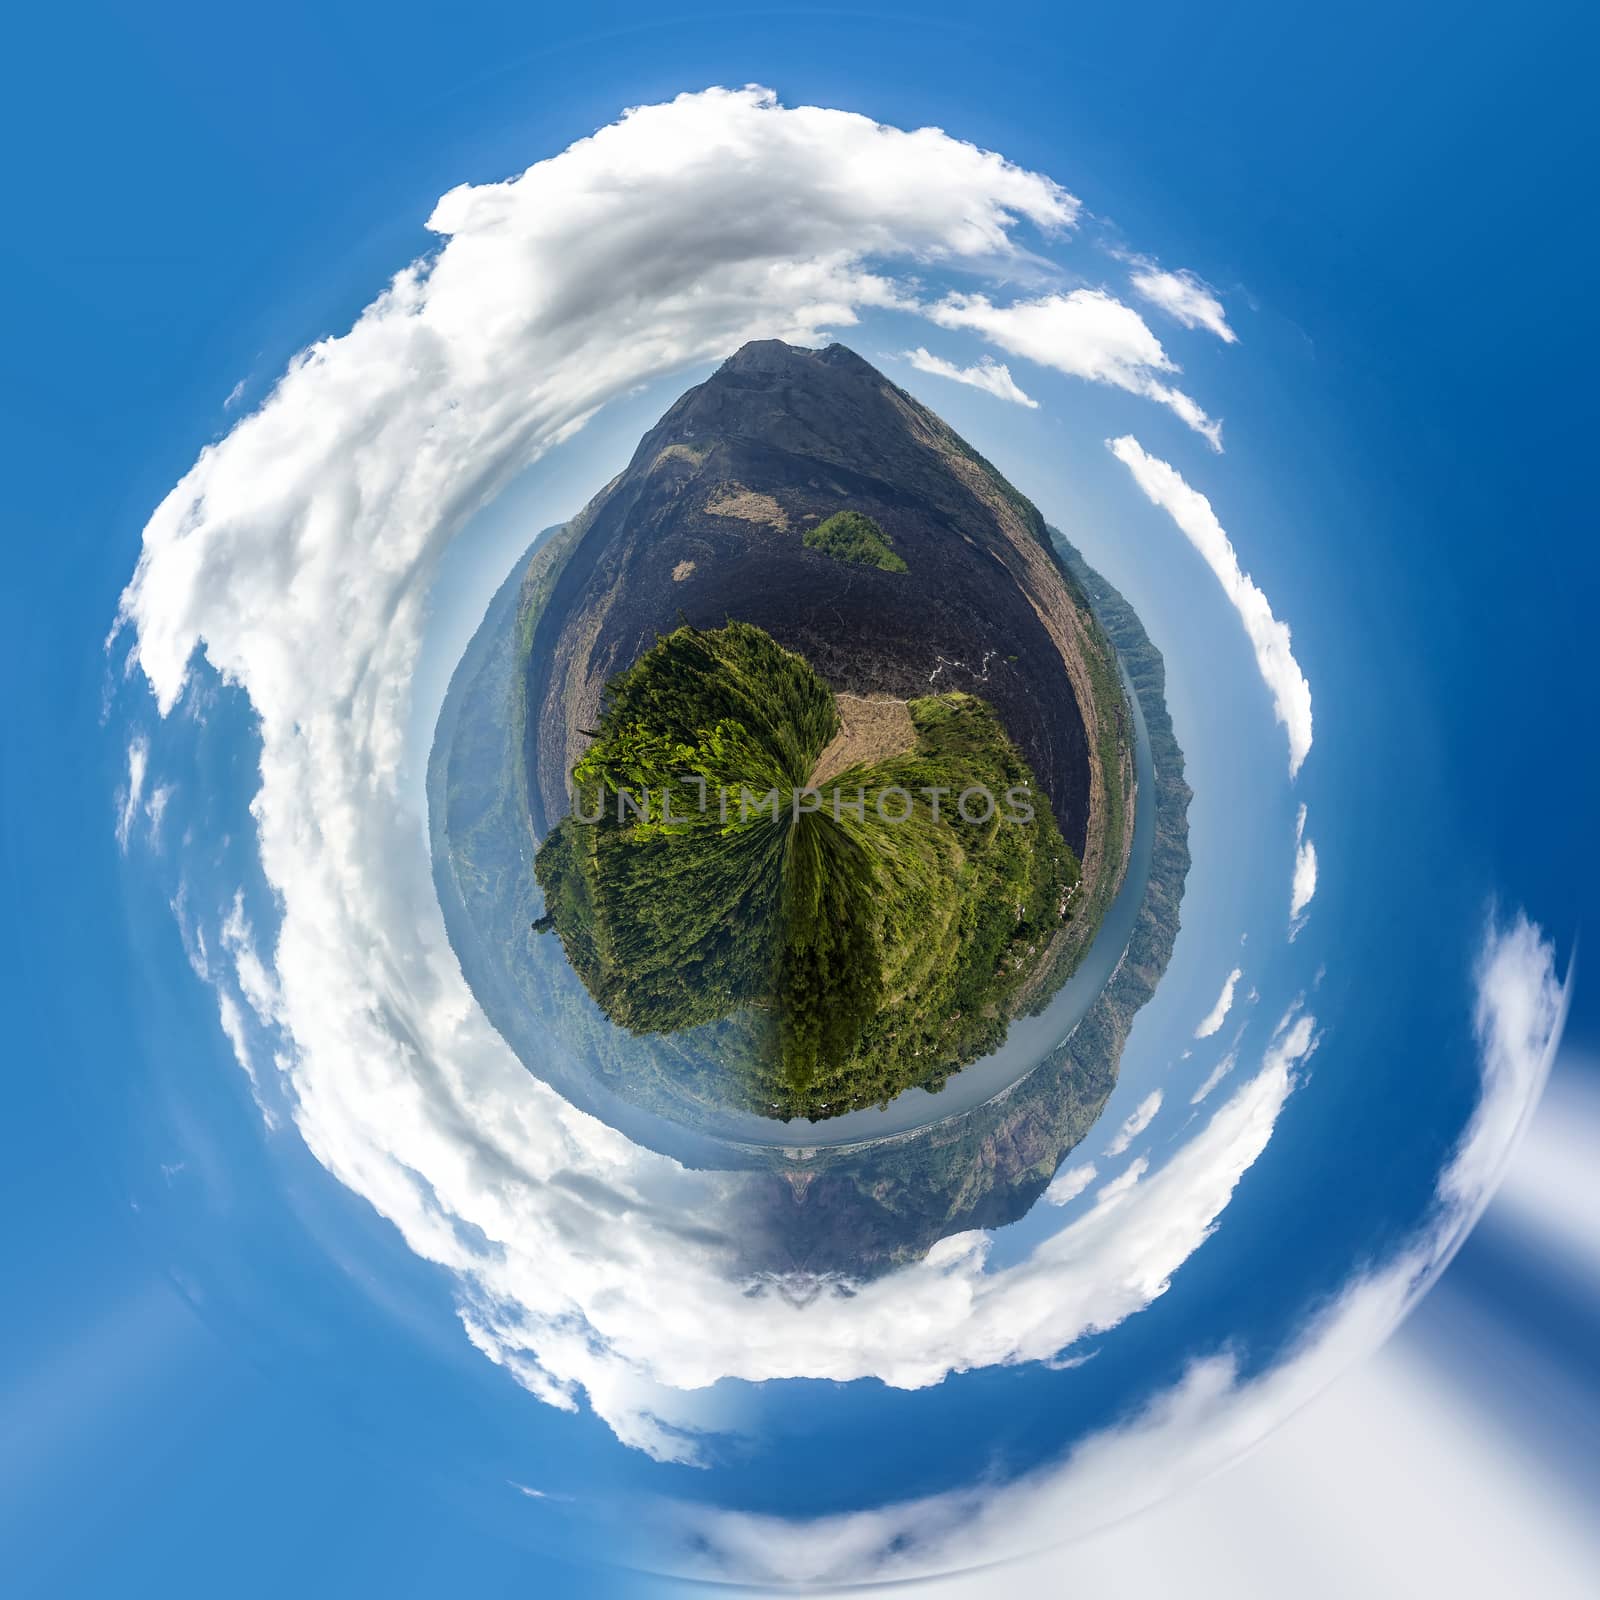 Tiny green planet indonesia. Batur volcano and Agung mountain panoramic view with blue sky from Kintamani, Bali, Indonesia ecology concept. Tiny green planet. Save world nature project.